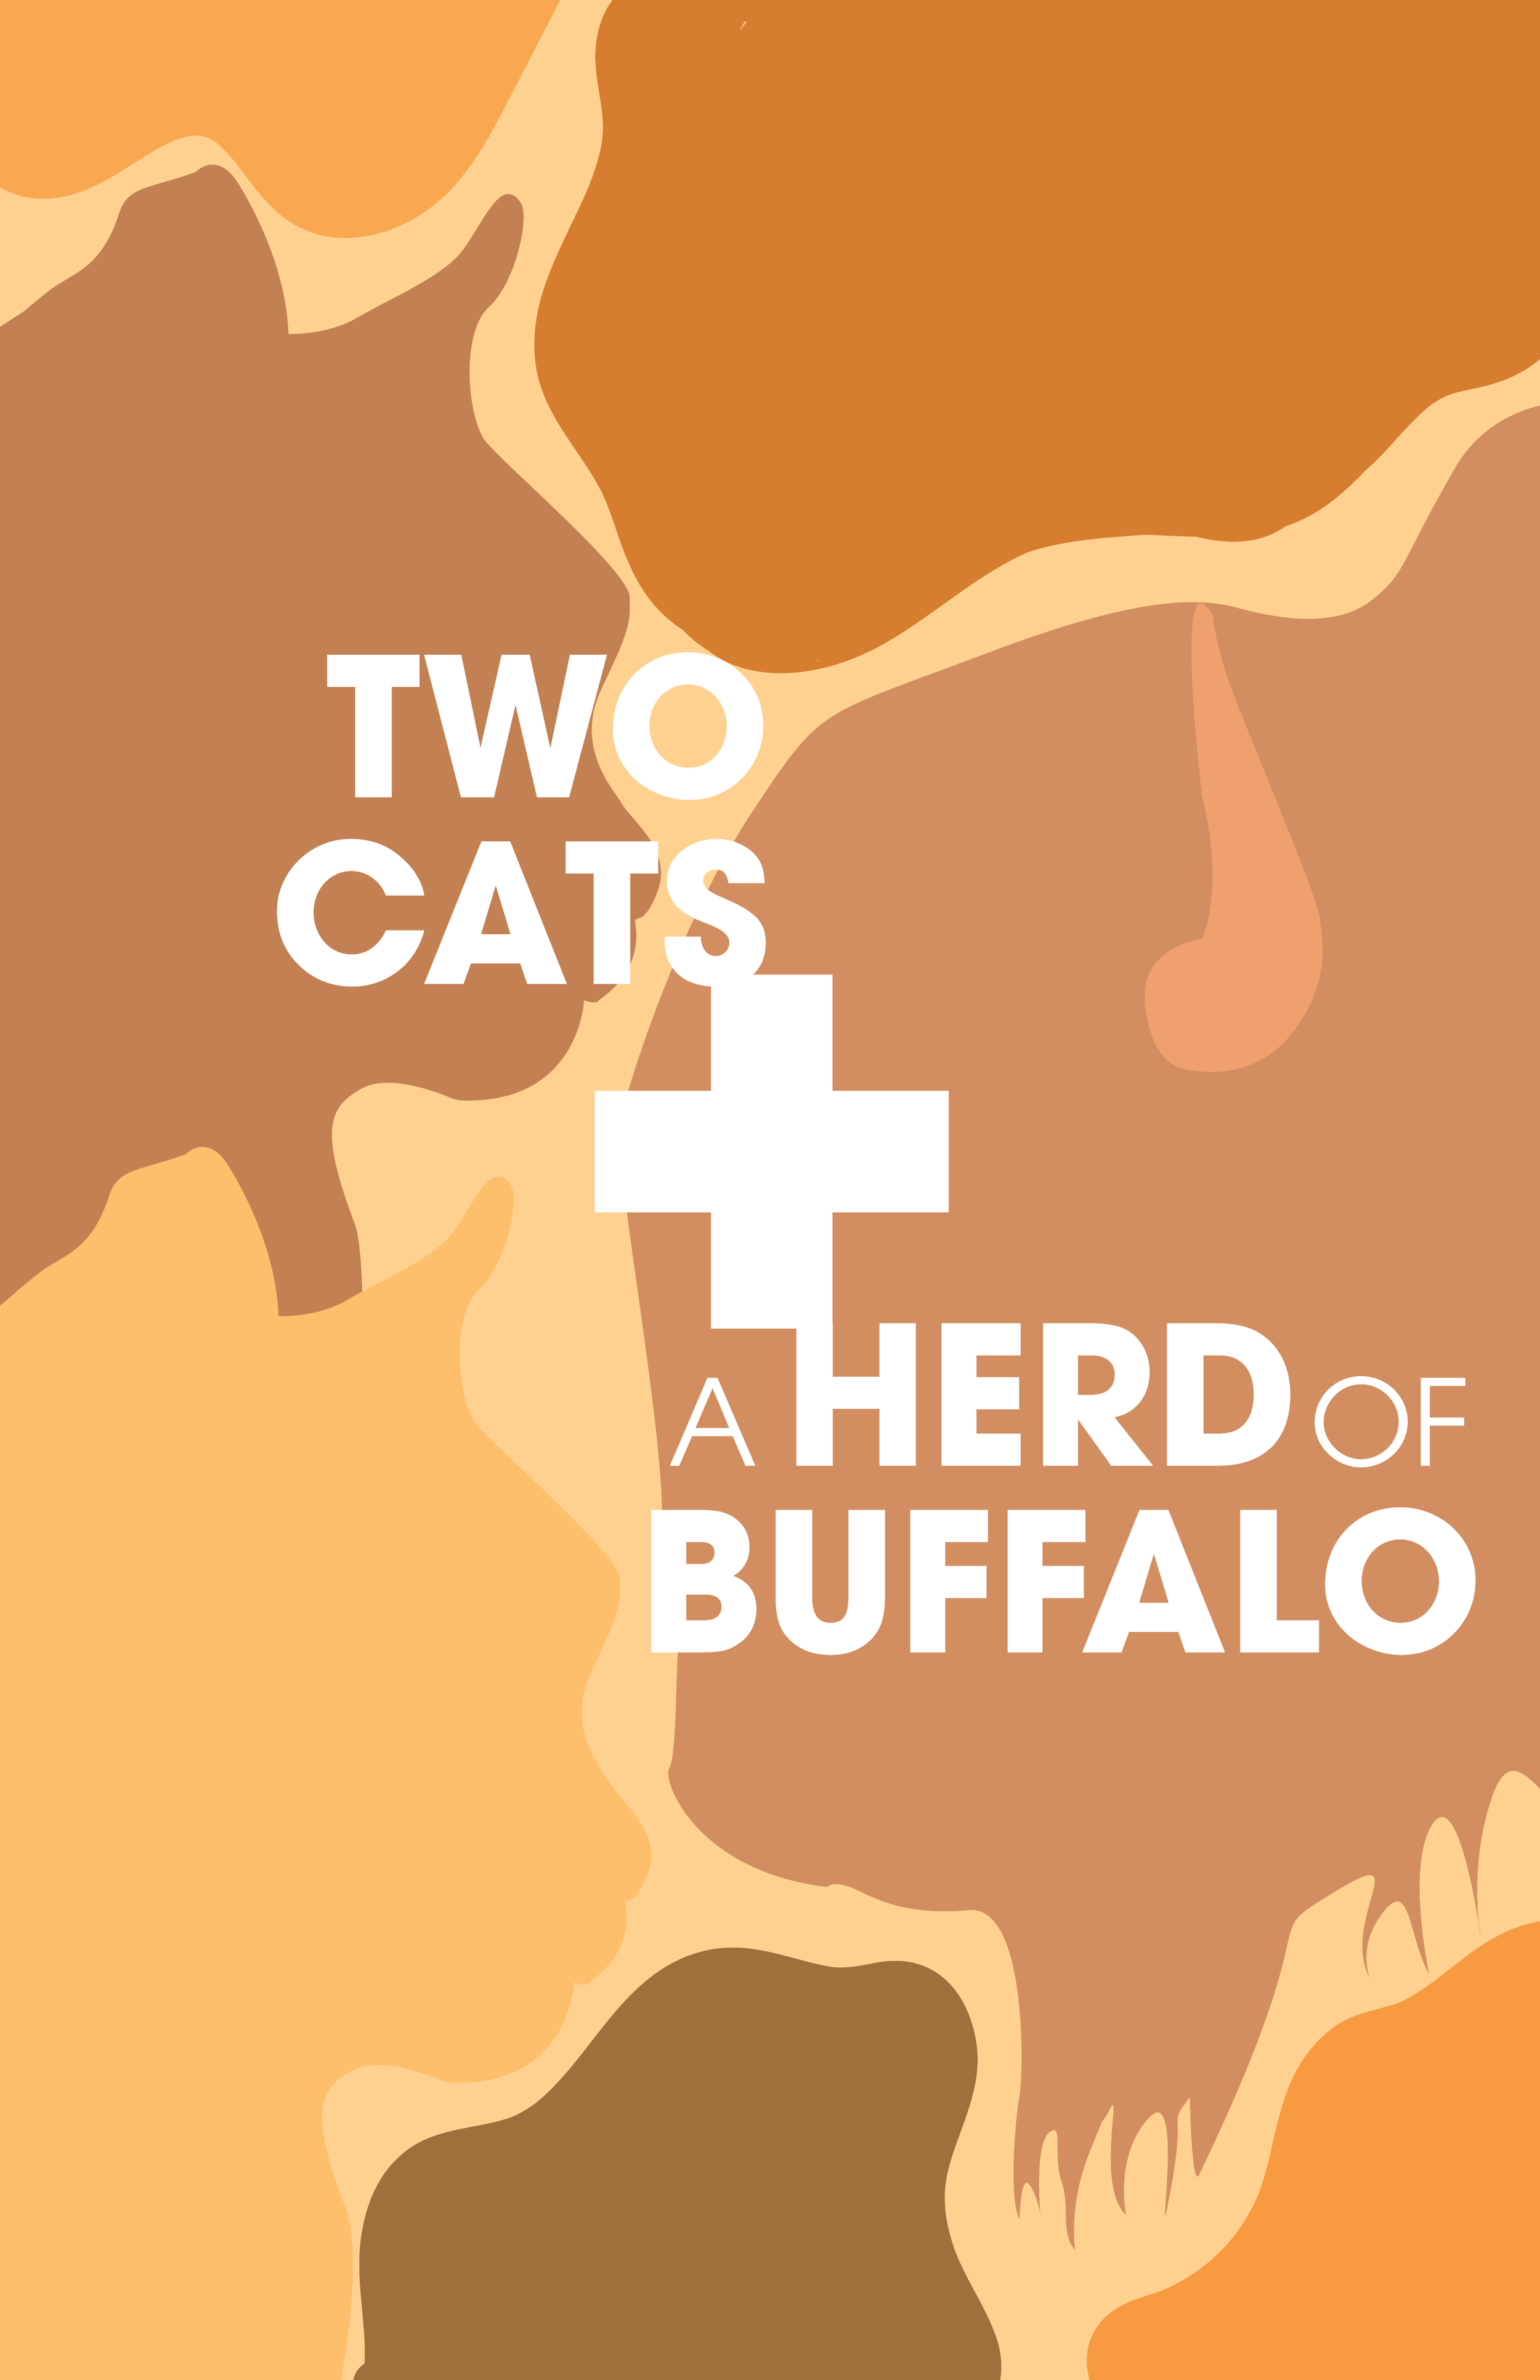 Two Cats + a Herd of Buffalo